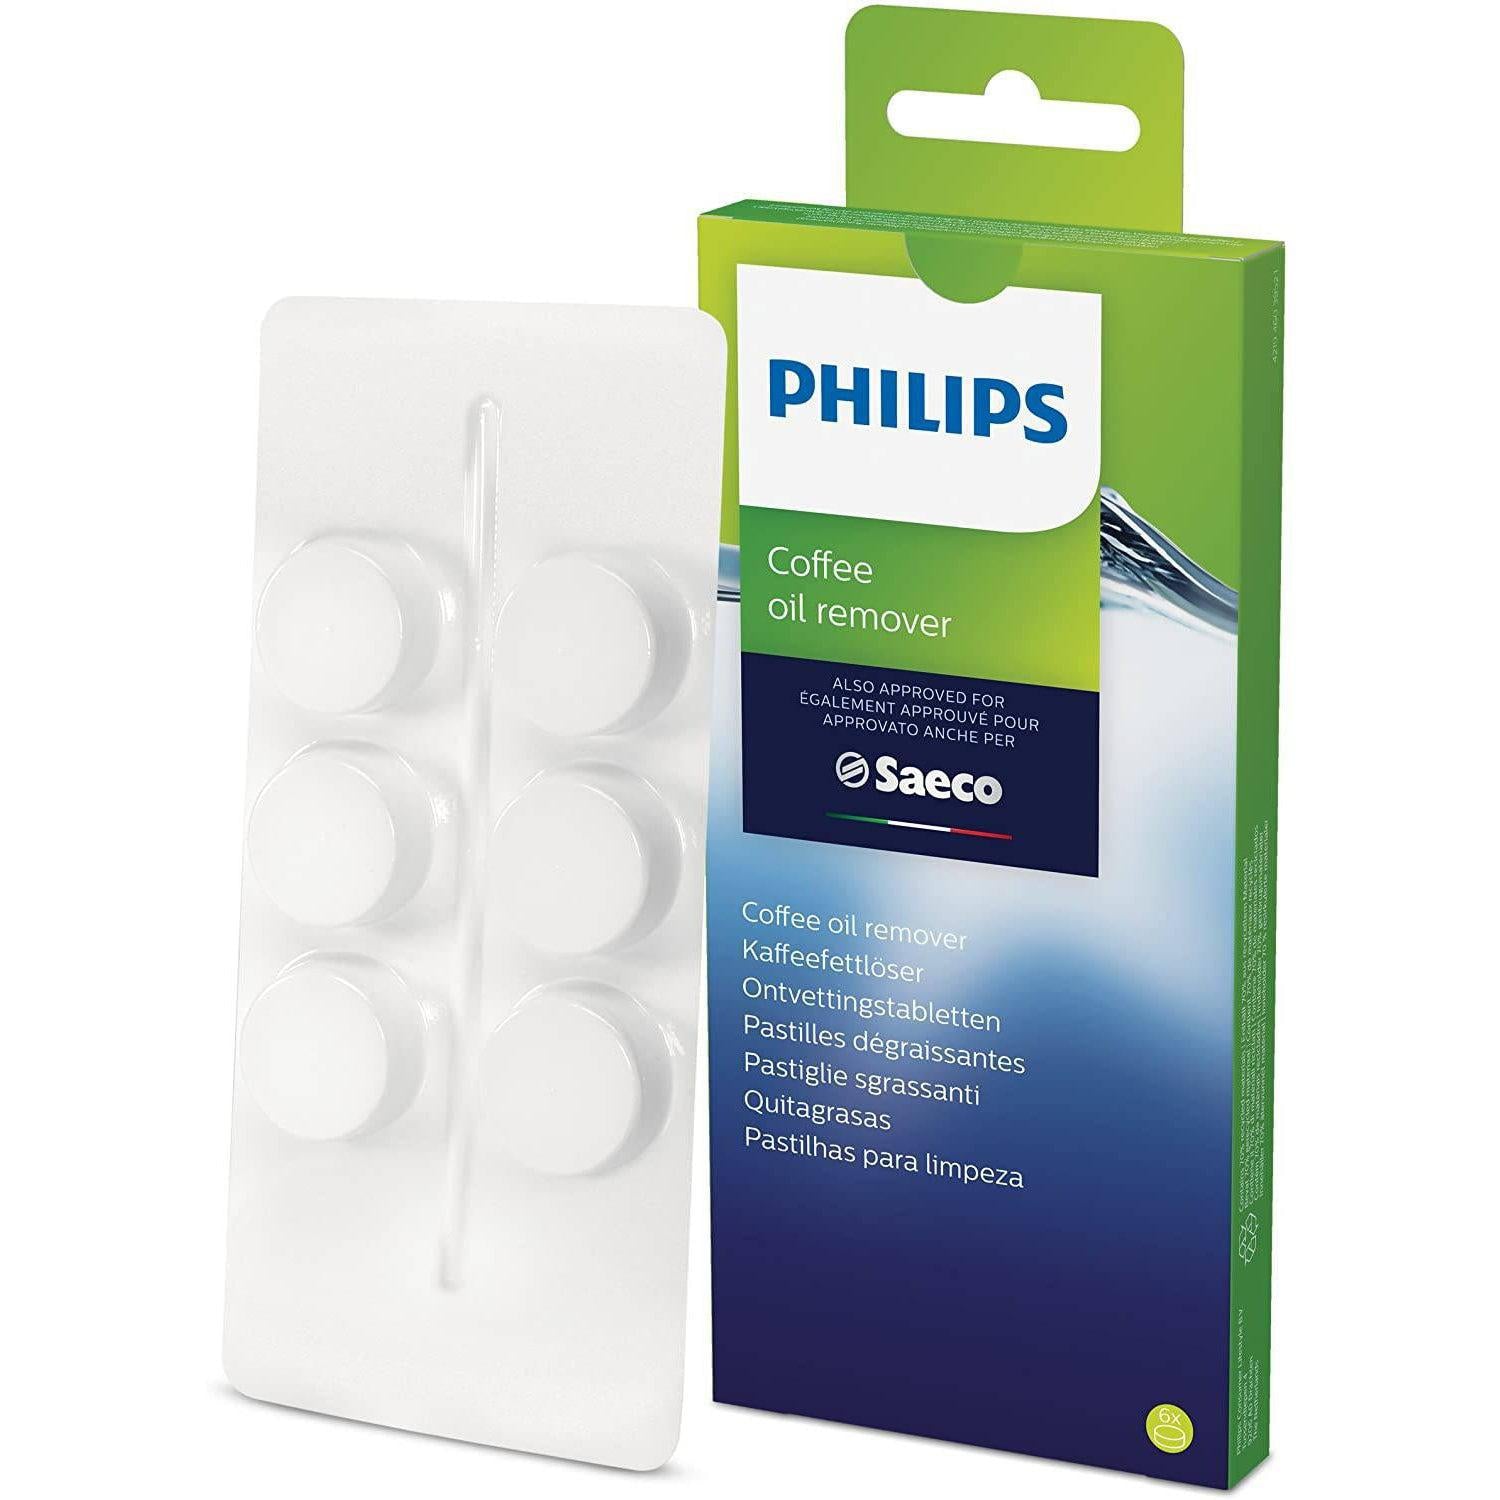 Philips CA6704/10 Coffee Fat Remover, 6 Tablets for Philips, Saeco and Other Fully Automatic Coffee Machines - Healthxpress.ie